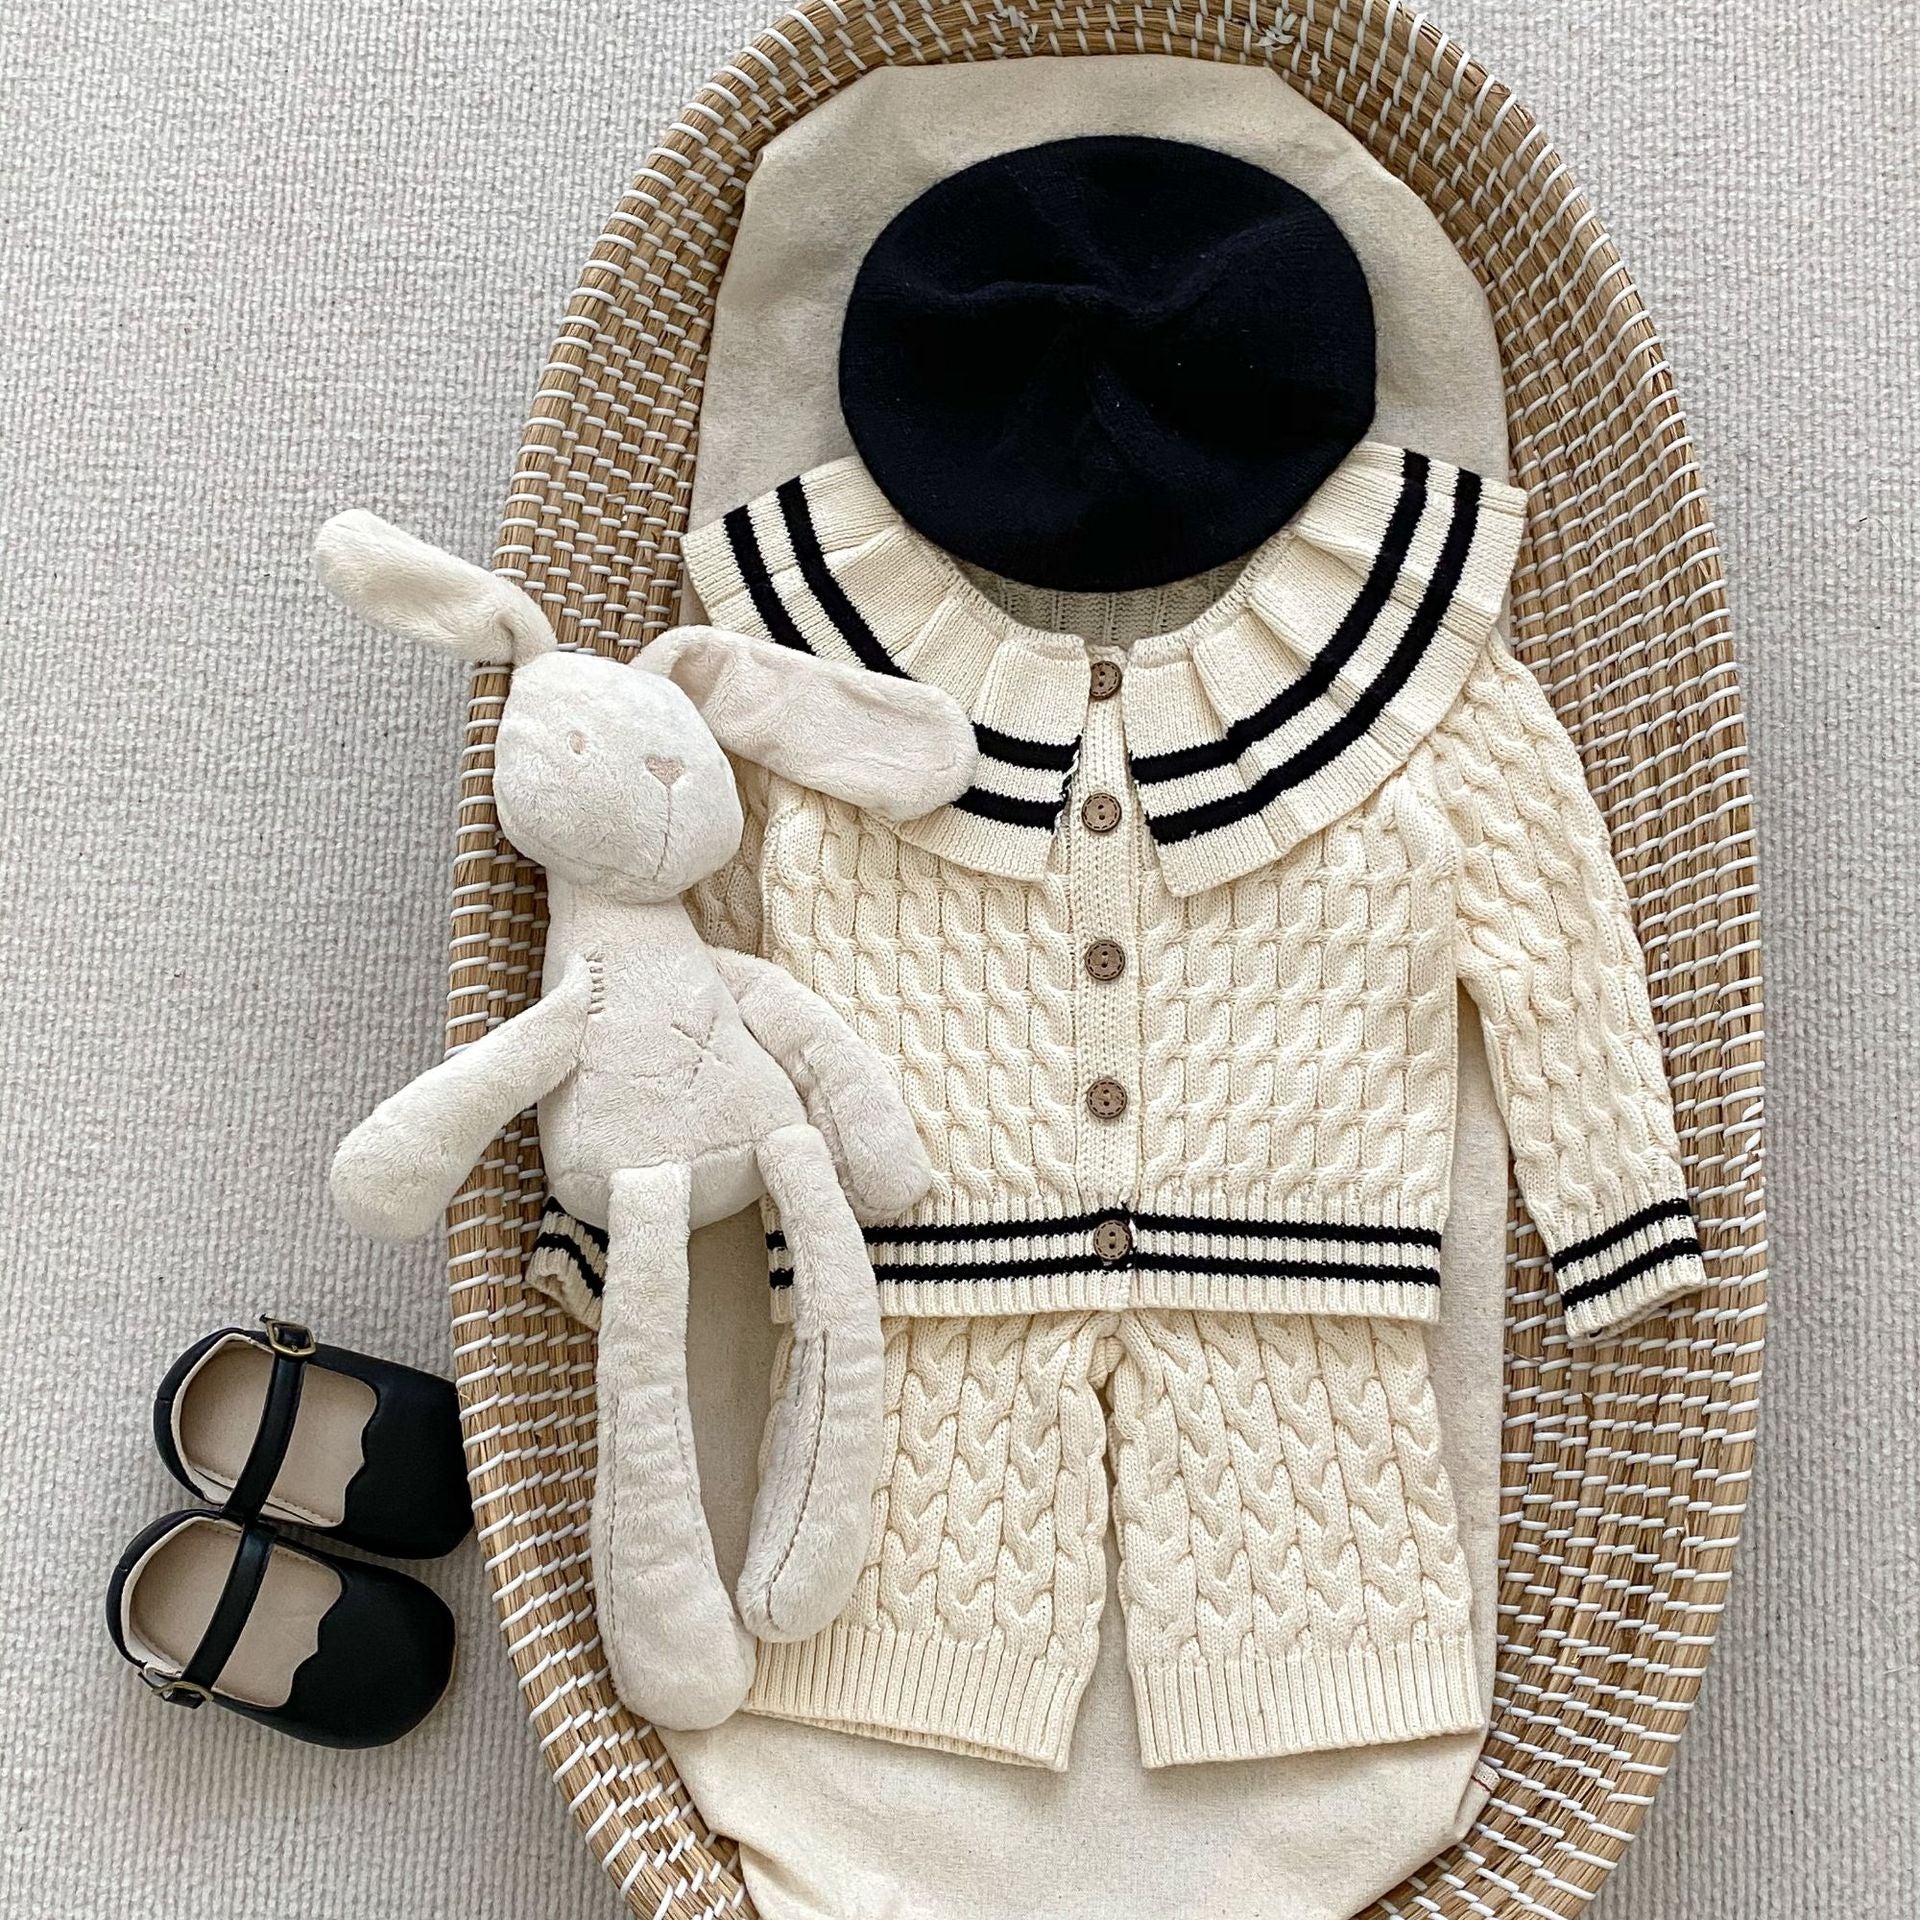 Sailor Collar Style Knitted Clothing Sets